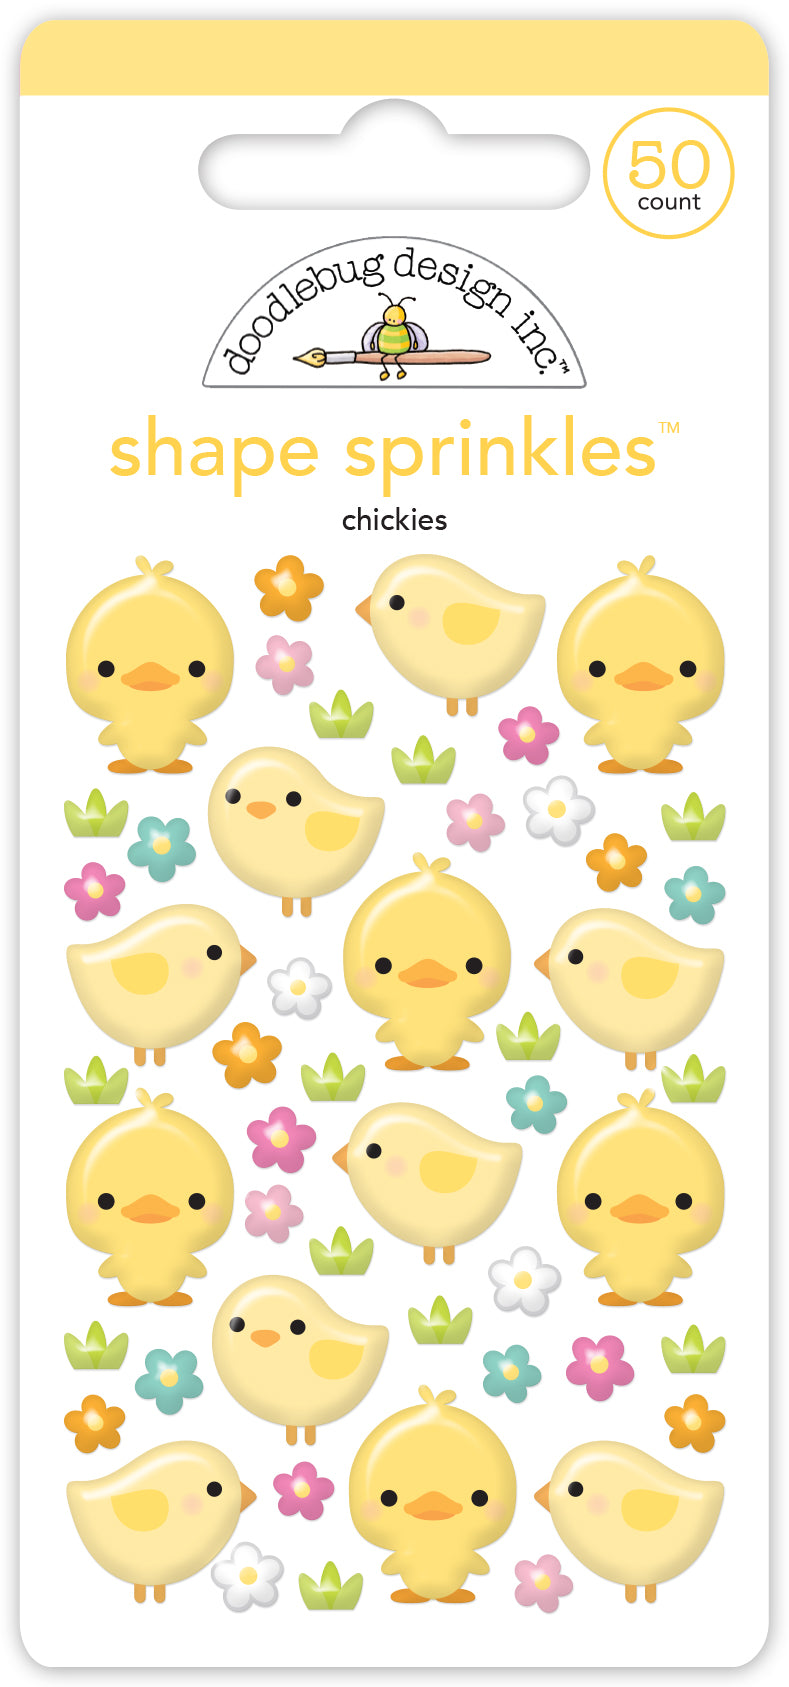 Chickies - Bunny Hop Sprinkle Stickers